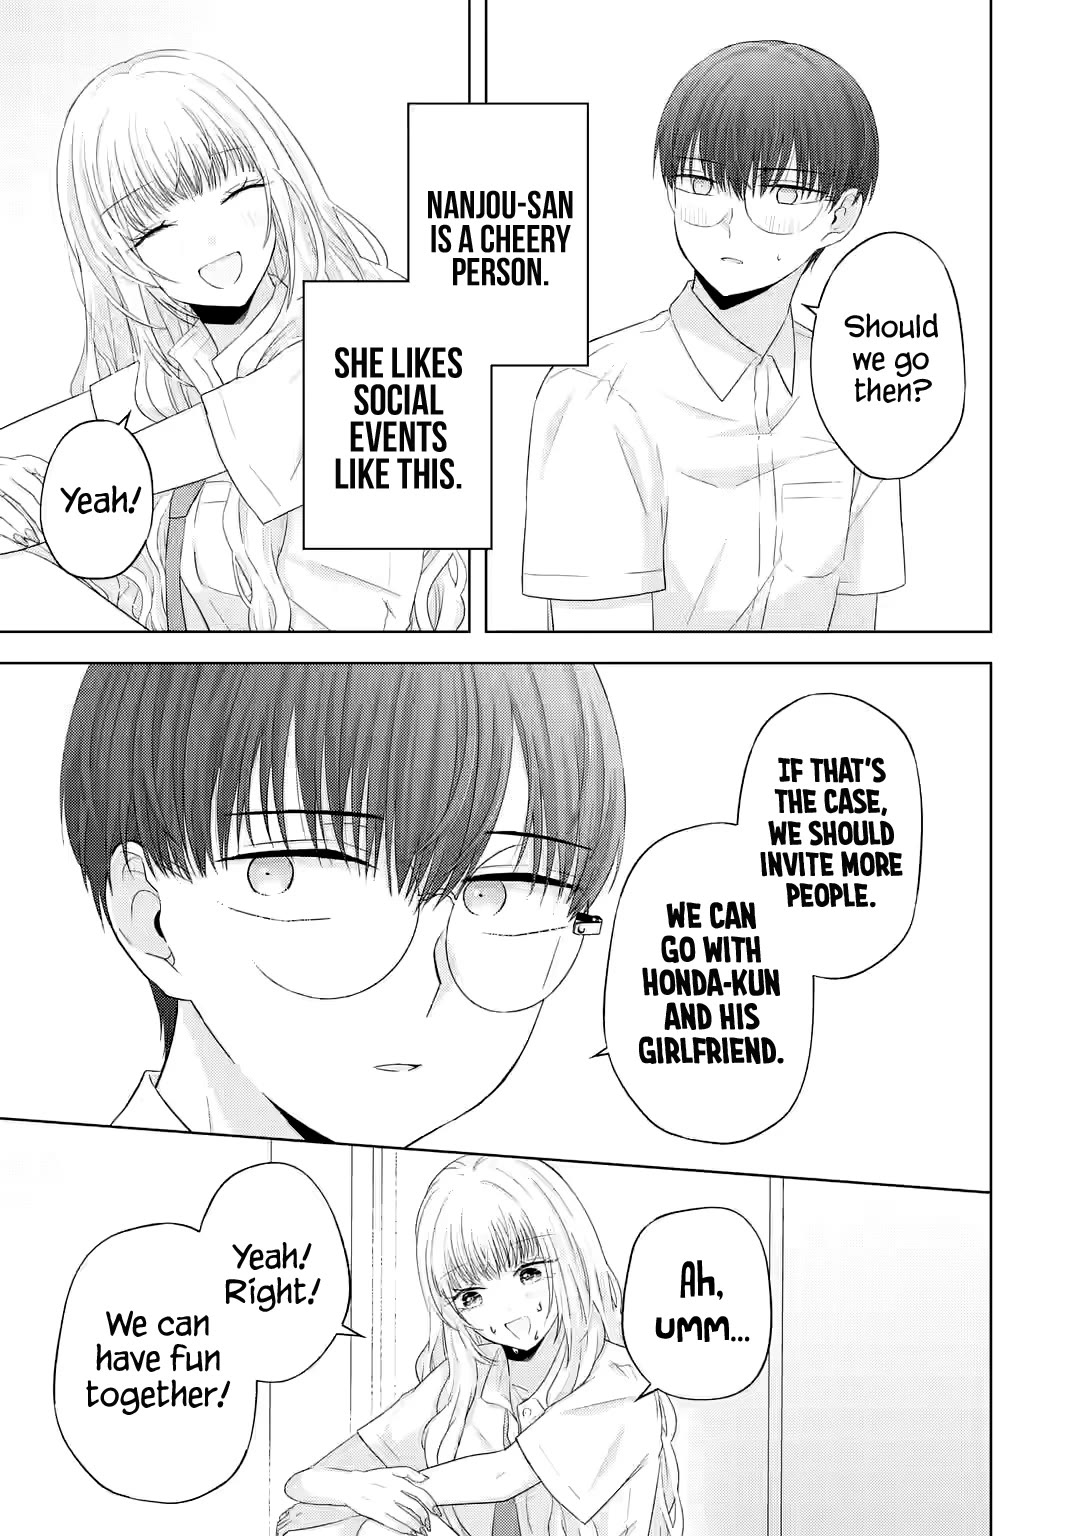 Nanjou-san Wants to Be Held by Me - chapter 11 - #6